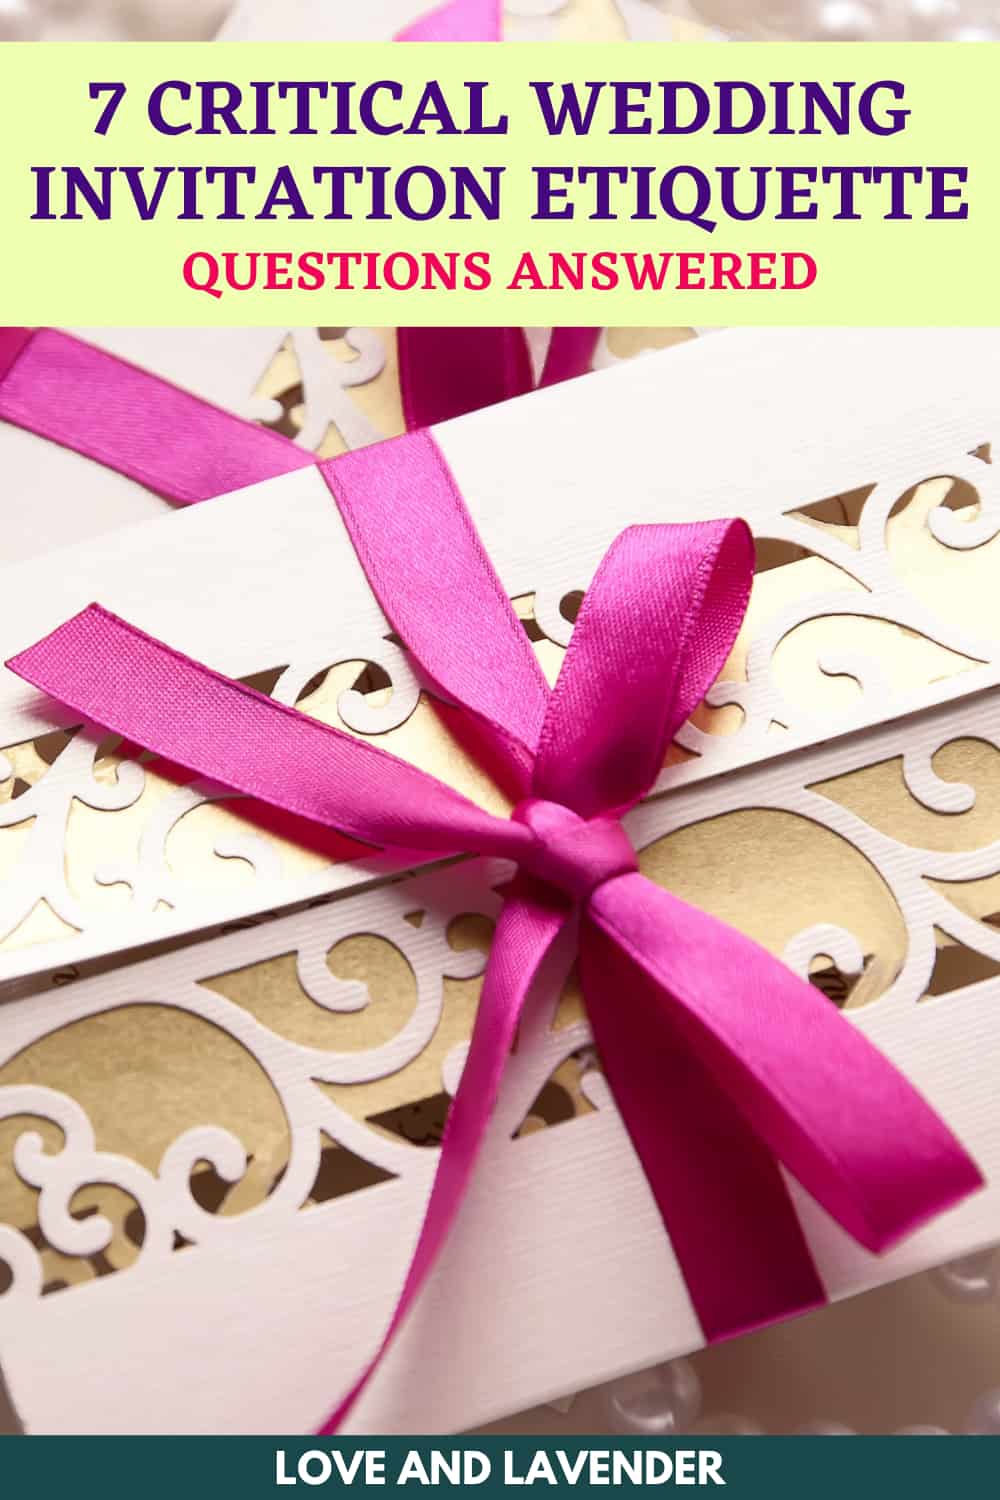 7 Critical Wedding Invitation Etiquette Questions Answered - Pinterest pin